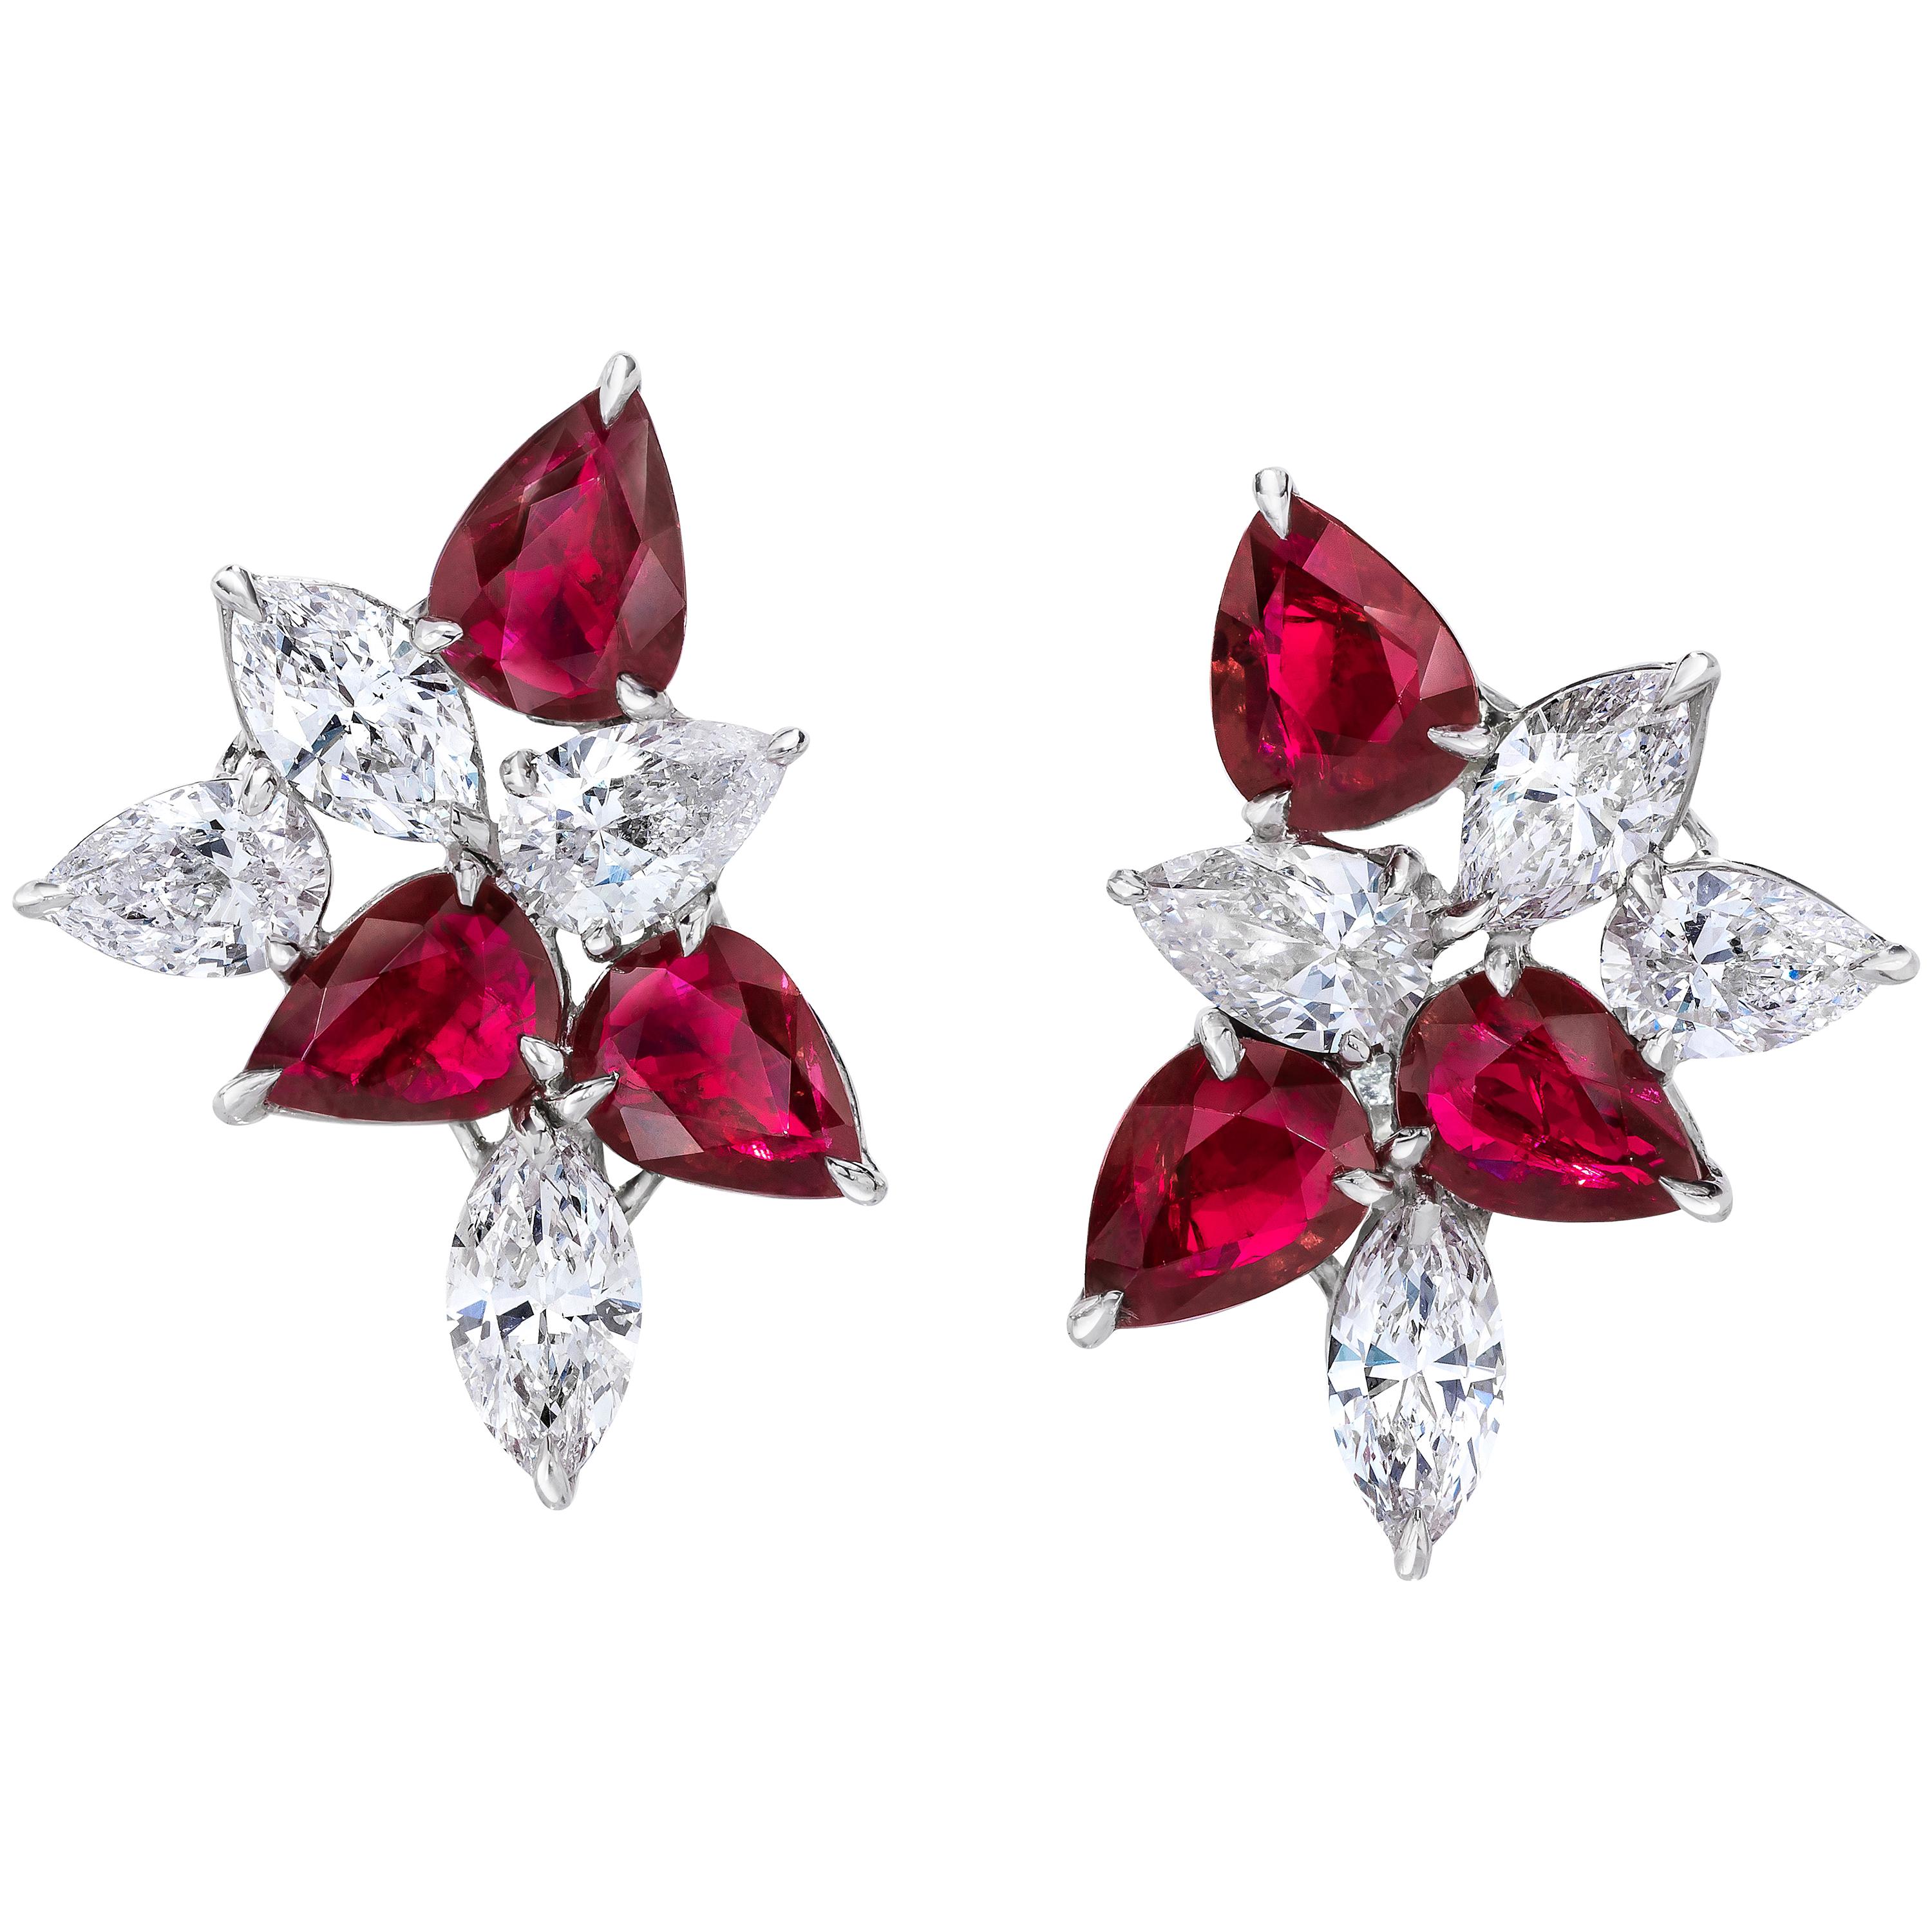 The Classic Cluster Earring. Redefined. Set with Rubies and Diamonds and Set in Platinum and 18 Karat White Gold.

Rubies totaling 7.17 Carats.
Diamonds Totaling 3.84 Carats.
11.01 Carats Total